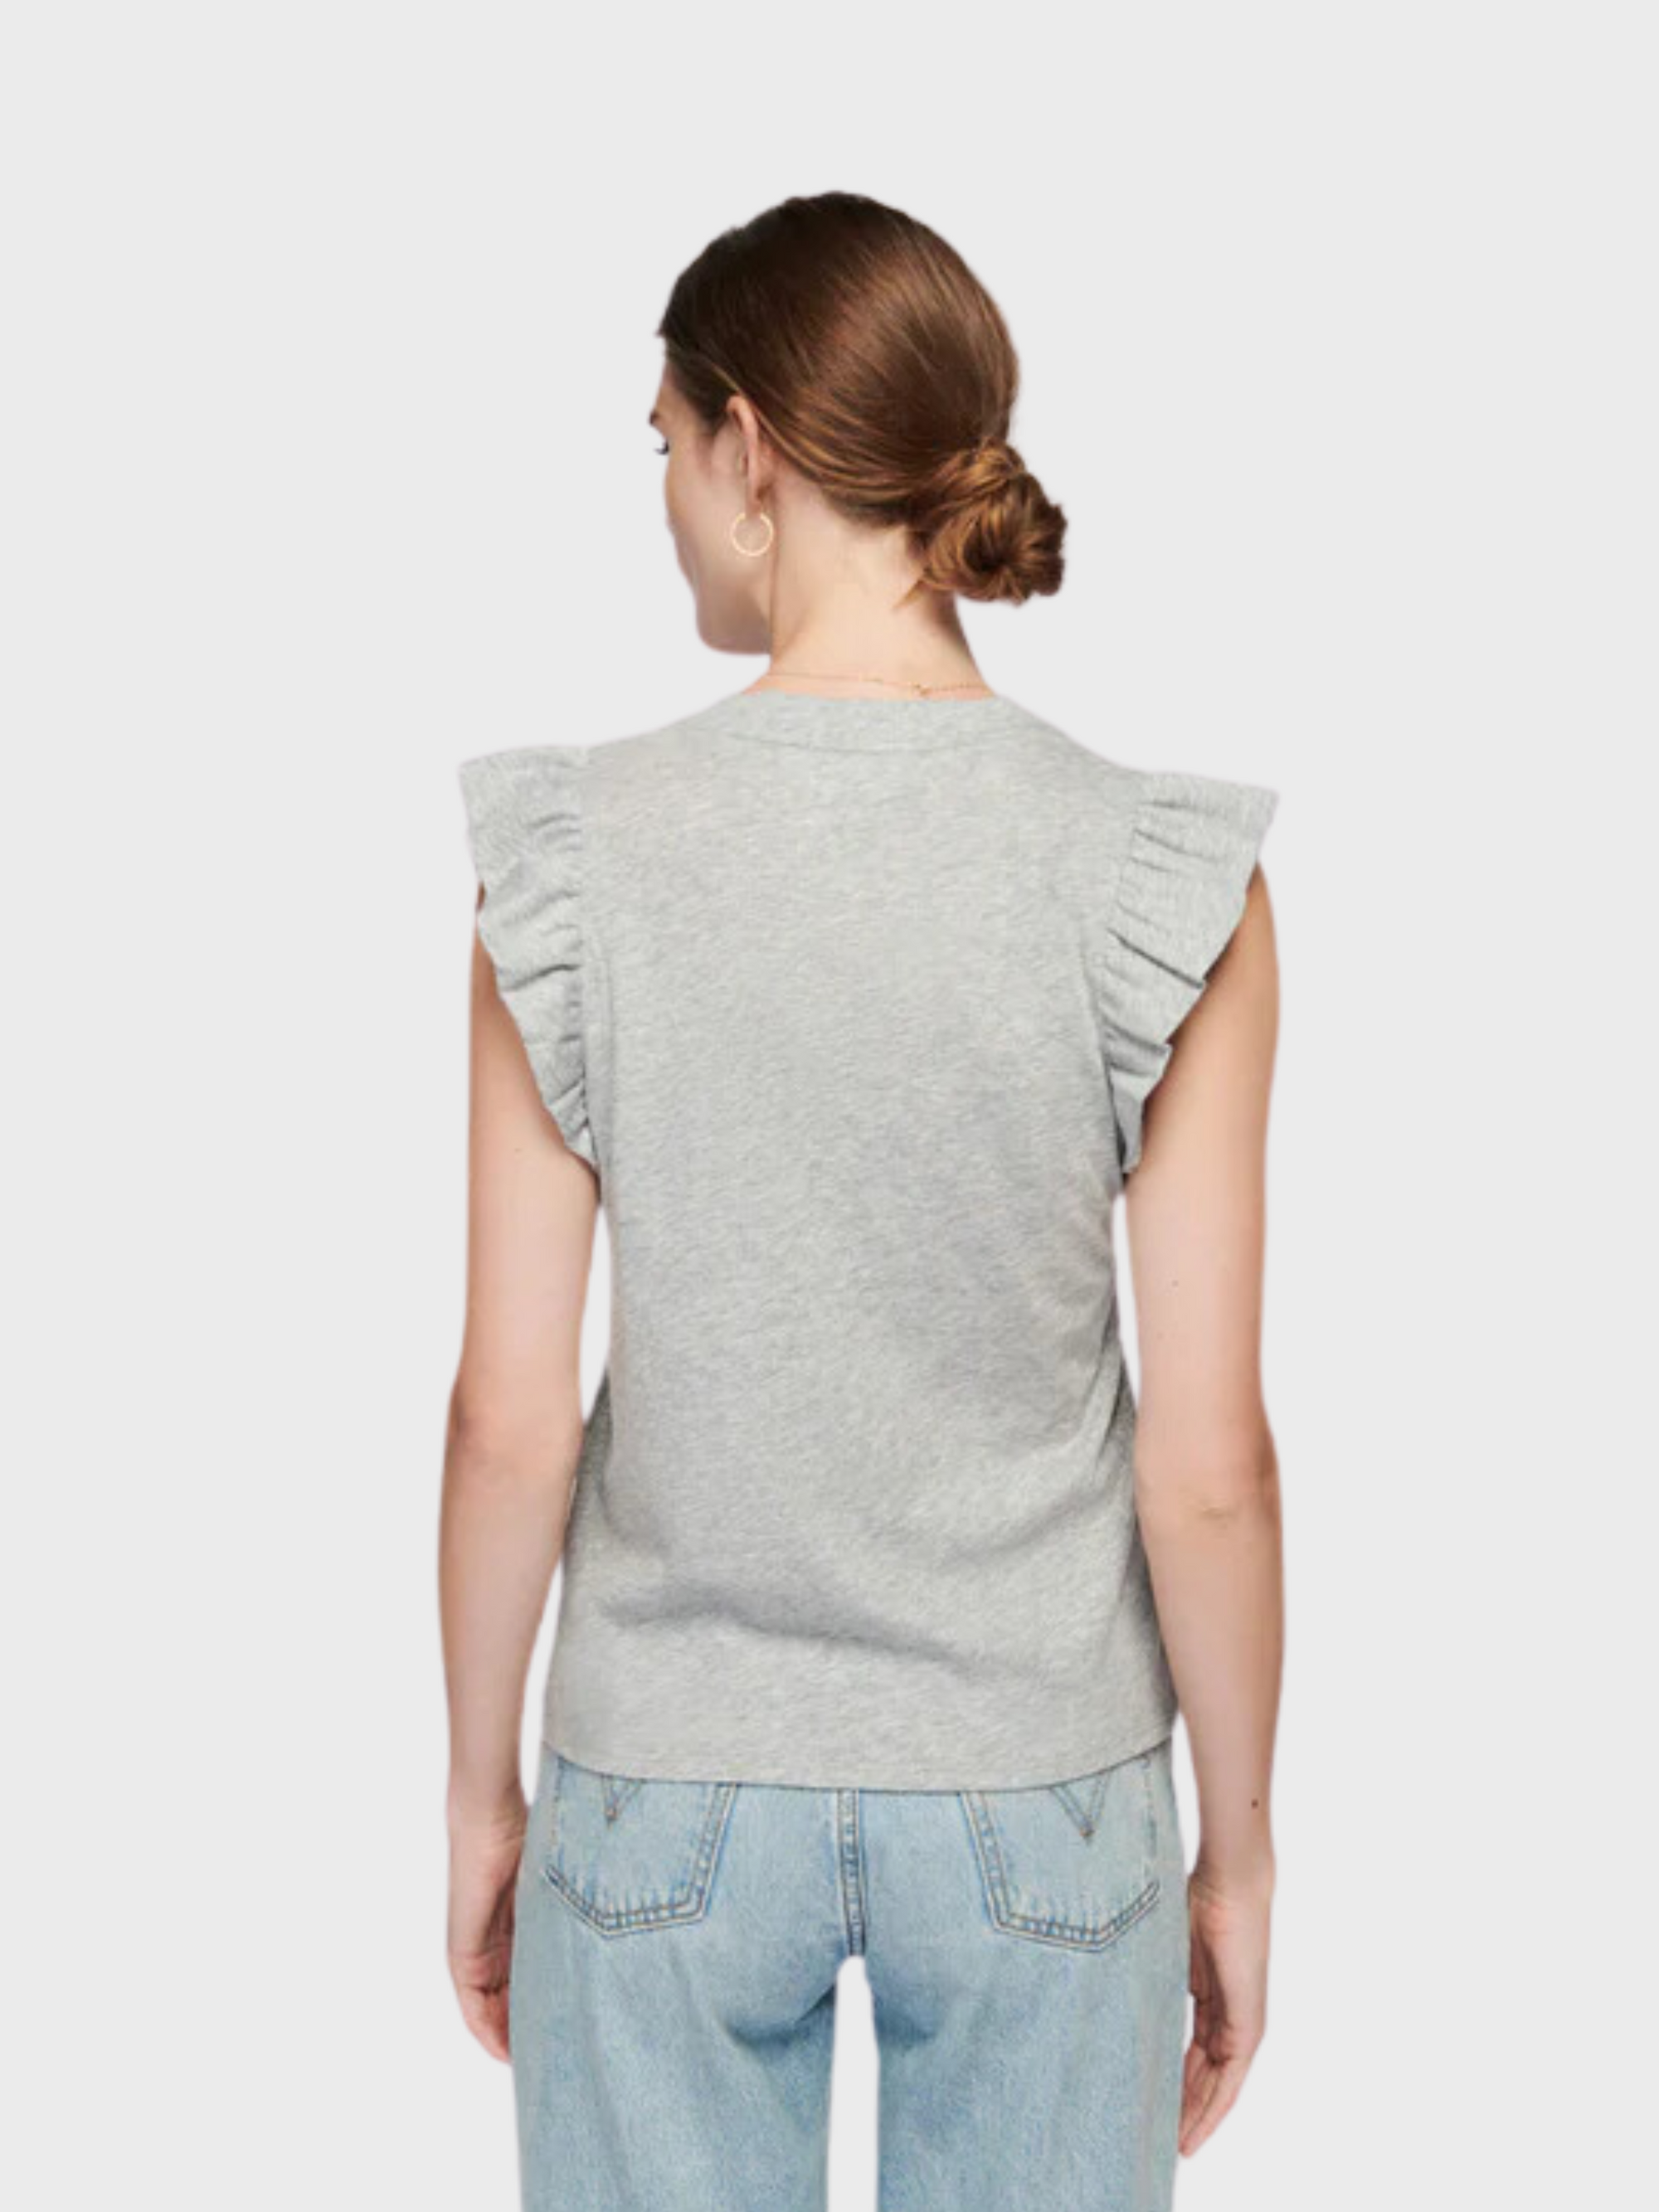 Nation Paulette Tank Heather Grey. Shop Women's T-Shirts at West of  Woodward Online or Visit Our Boutique in Yaletown, Vancouver, Canada.